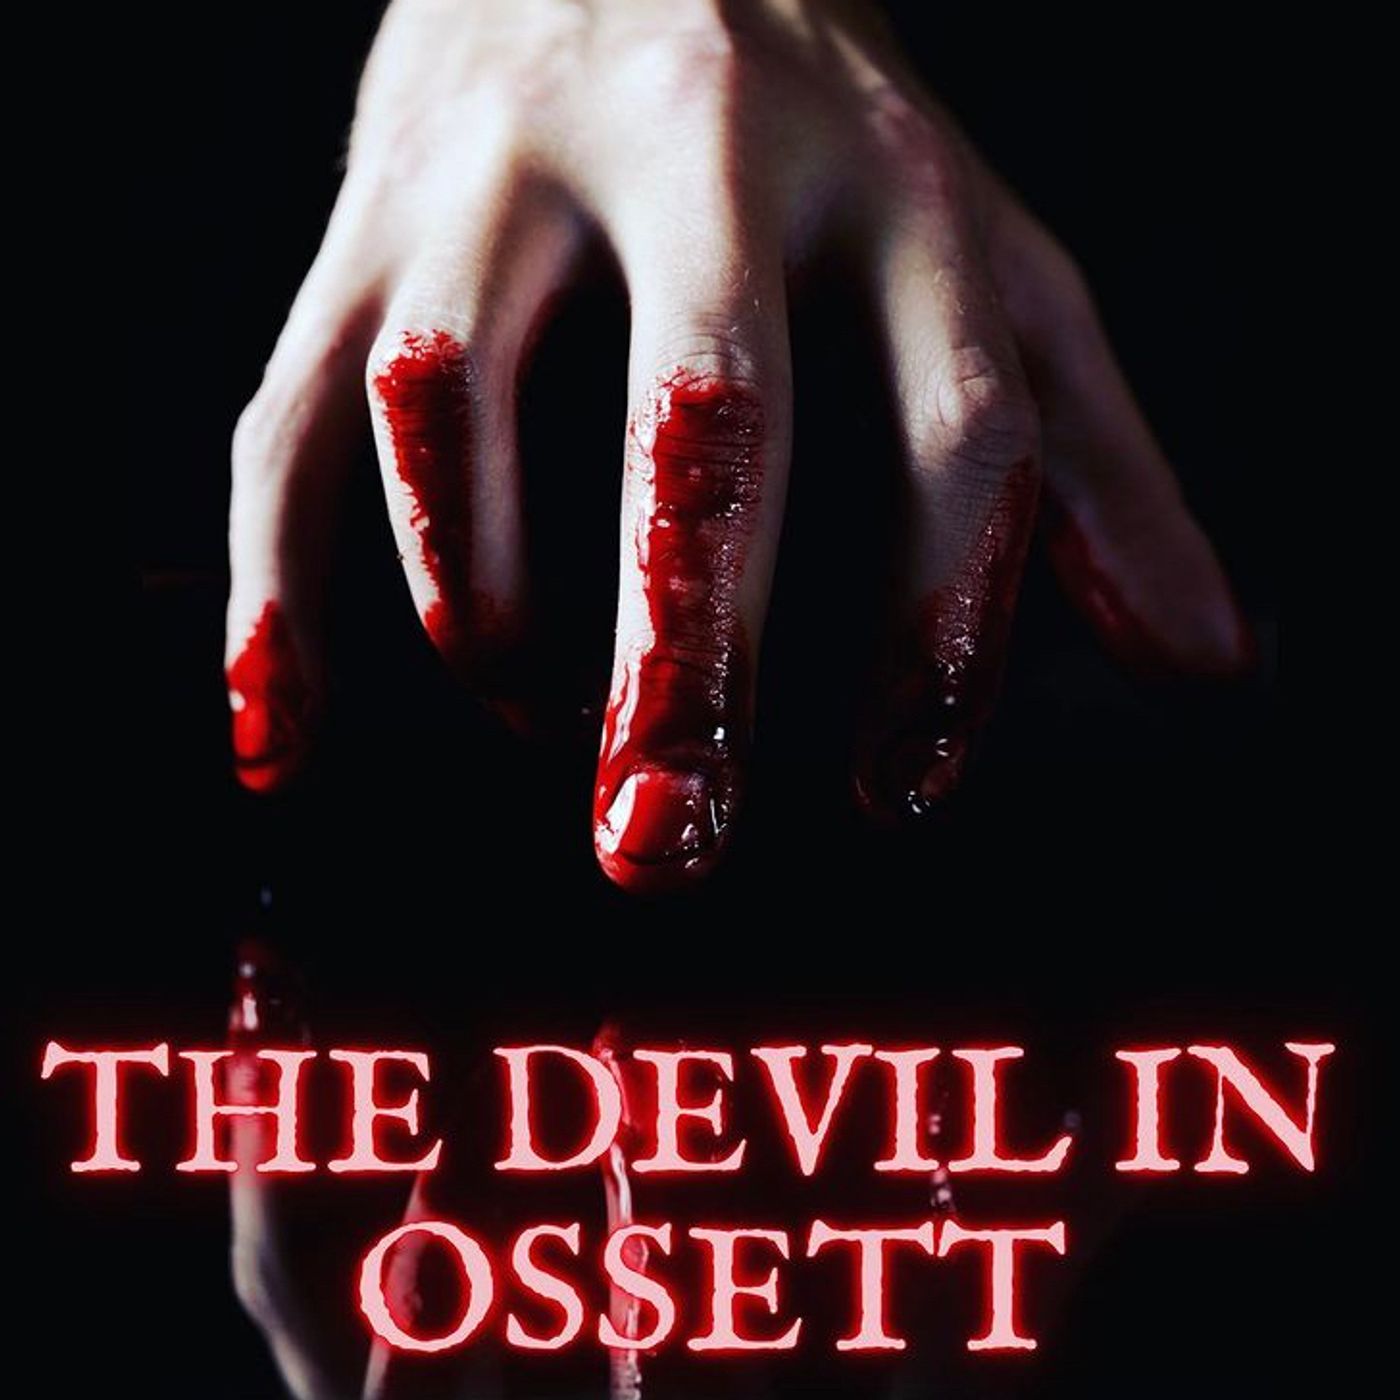 The Devil in Ossett - Michael Taylor by Rogue Darkness